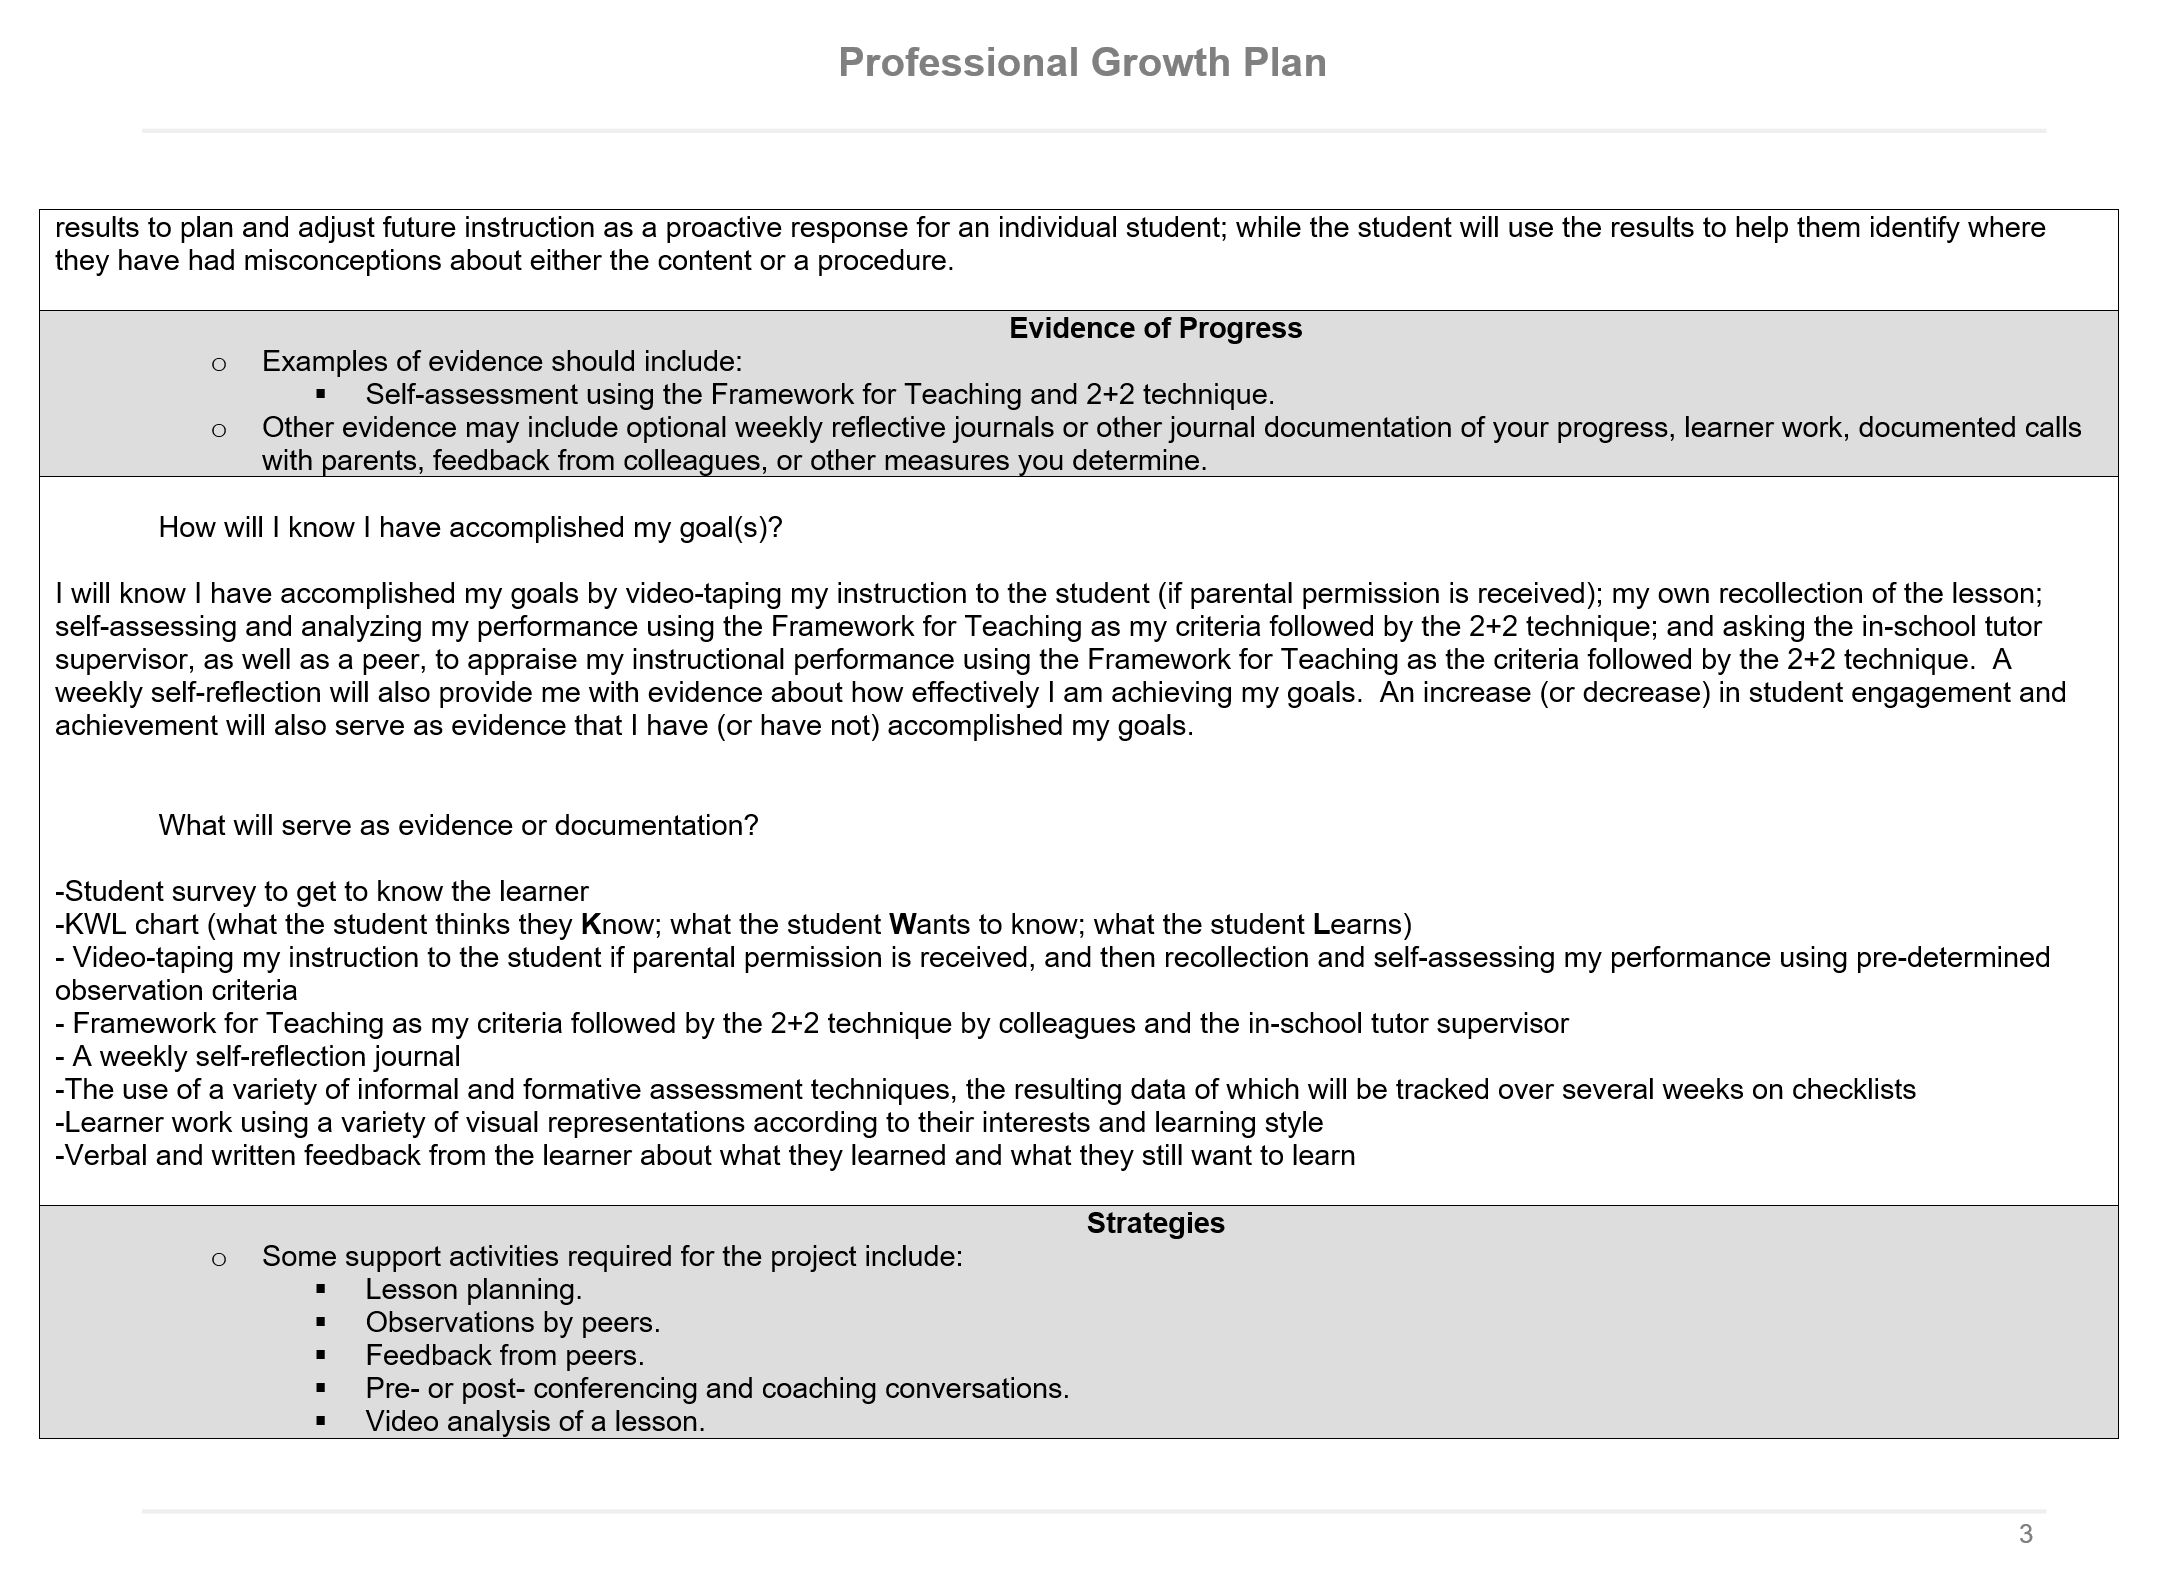 professional growth plan p 3 of 7